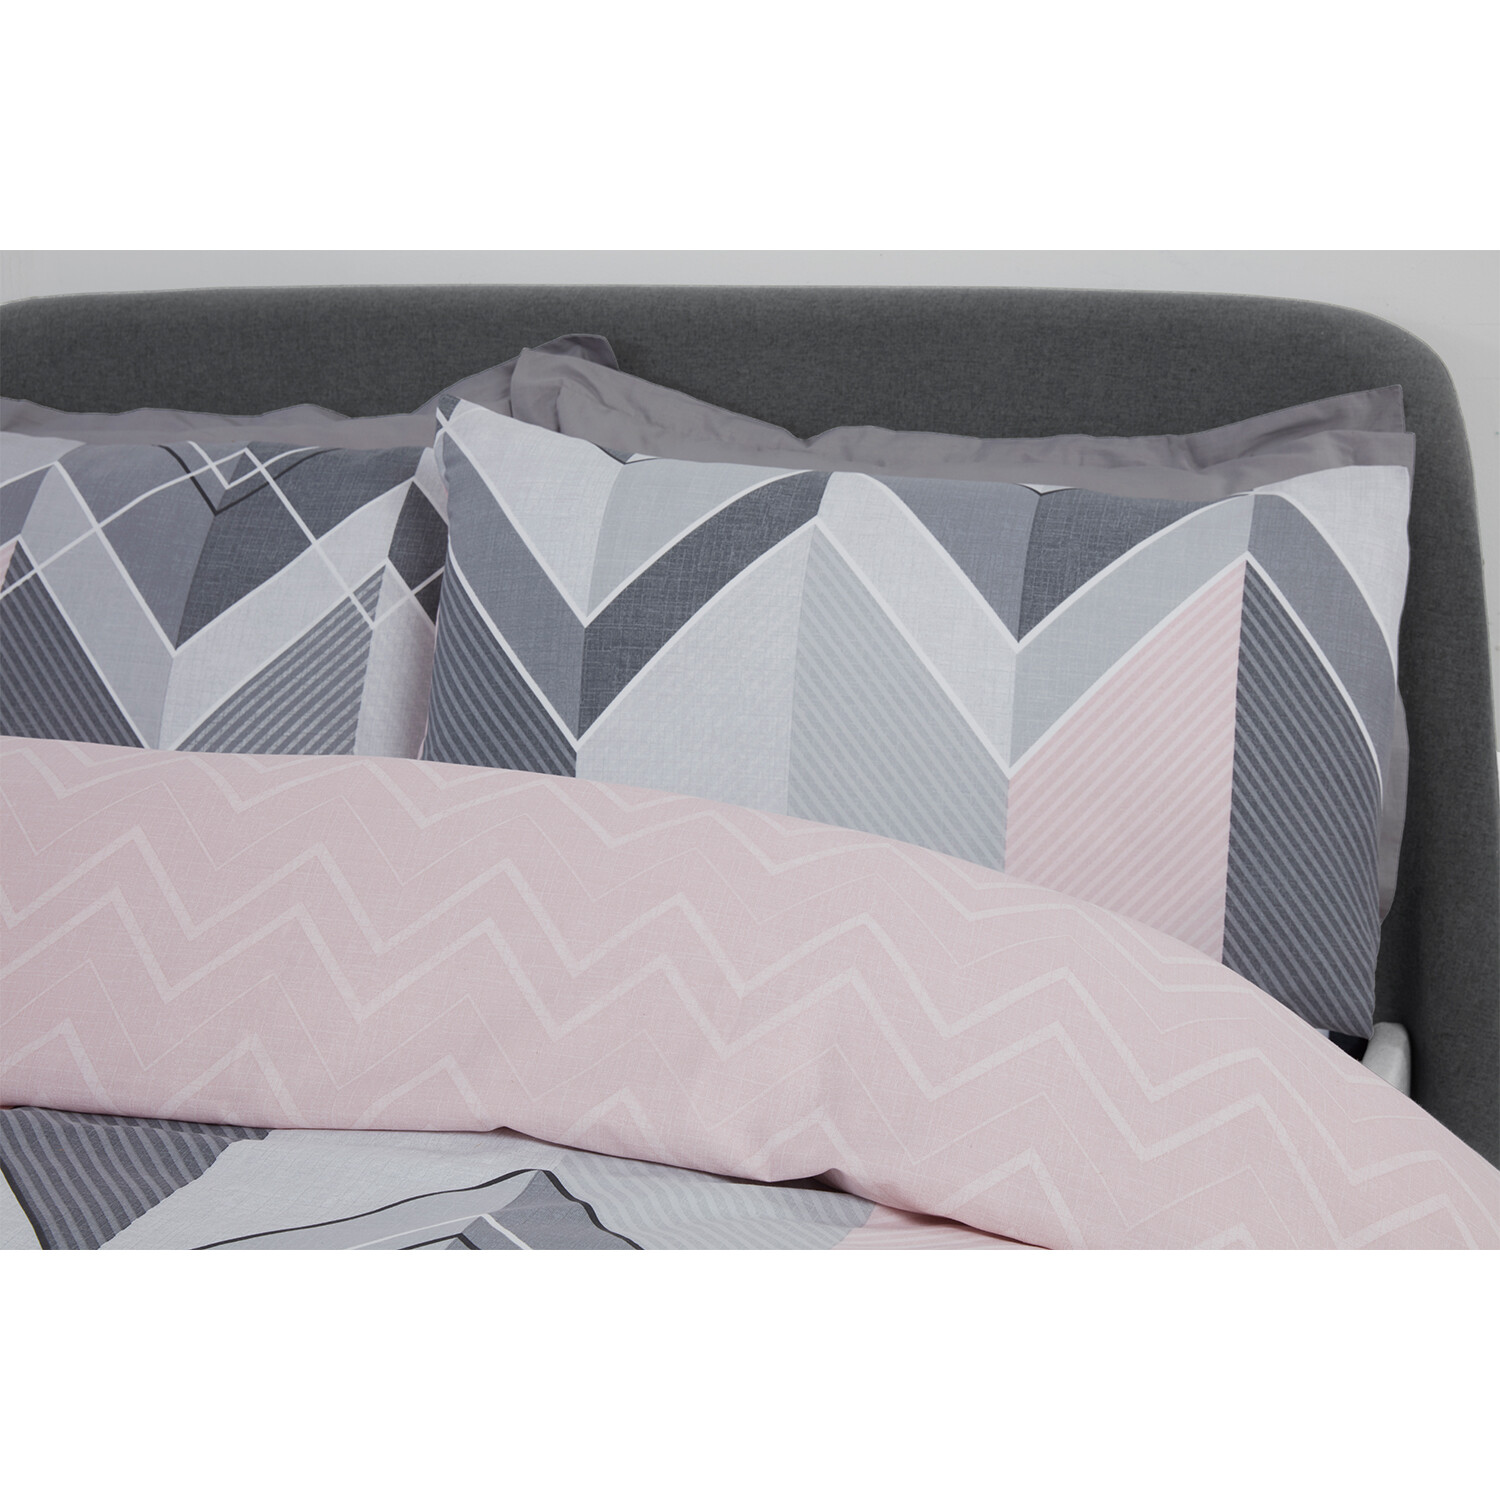 My Home King Pink Chevron Duvet Cover and Pillowcase Image 3